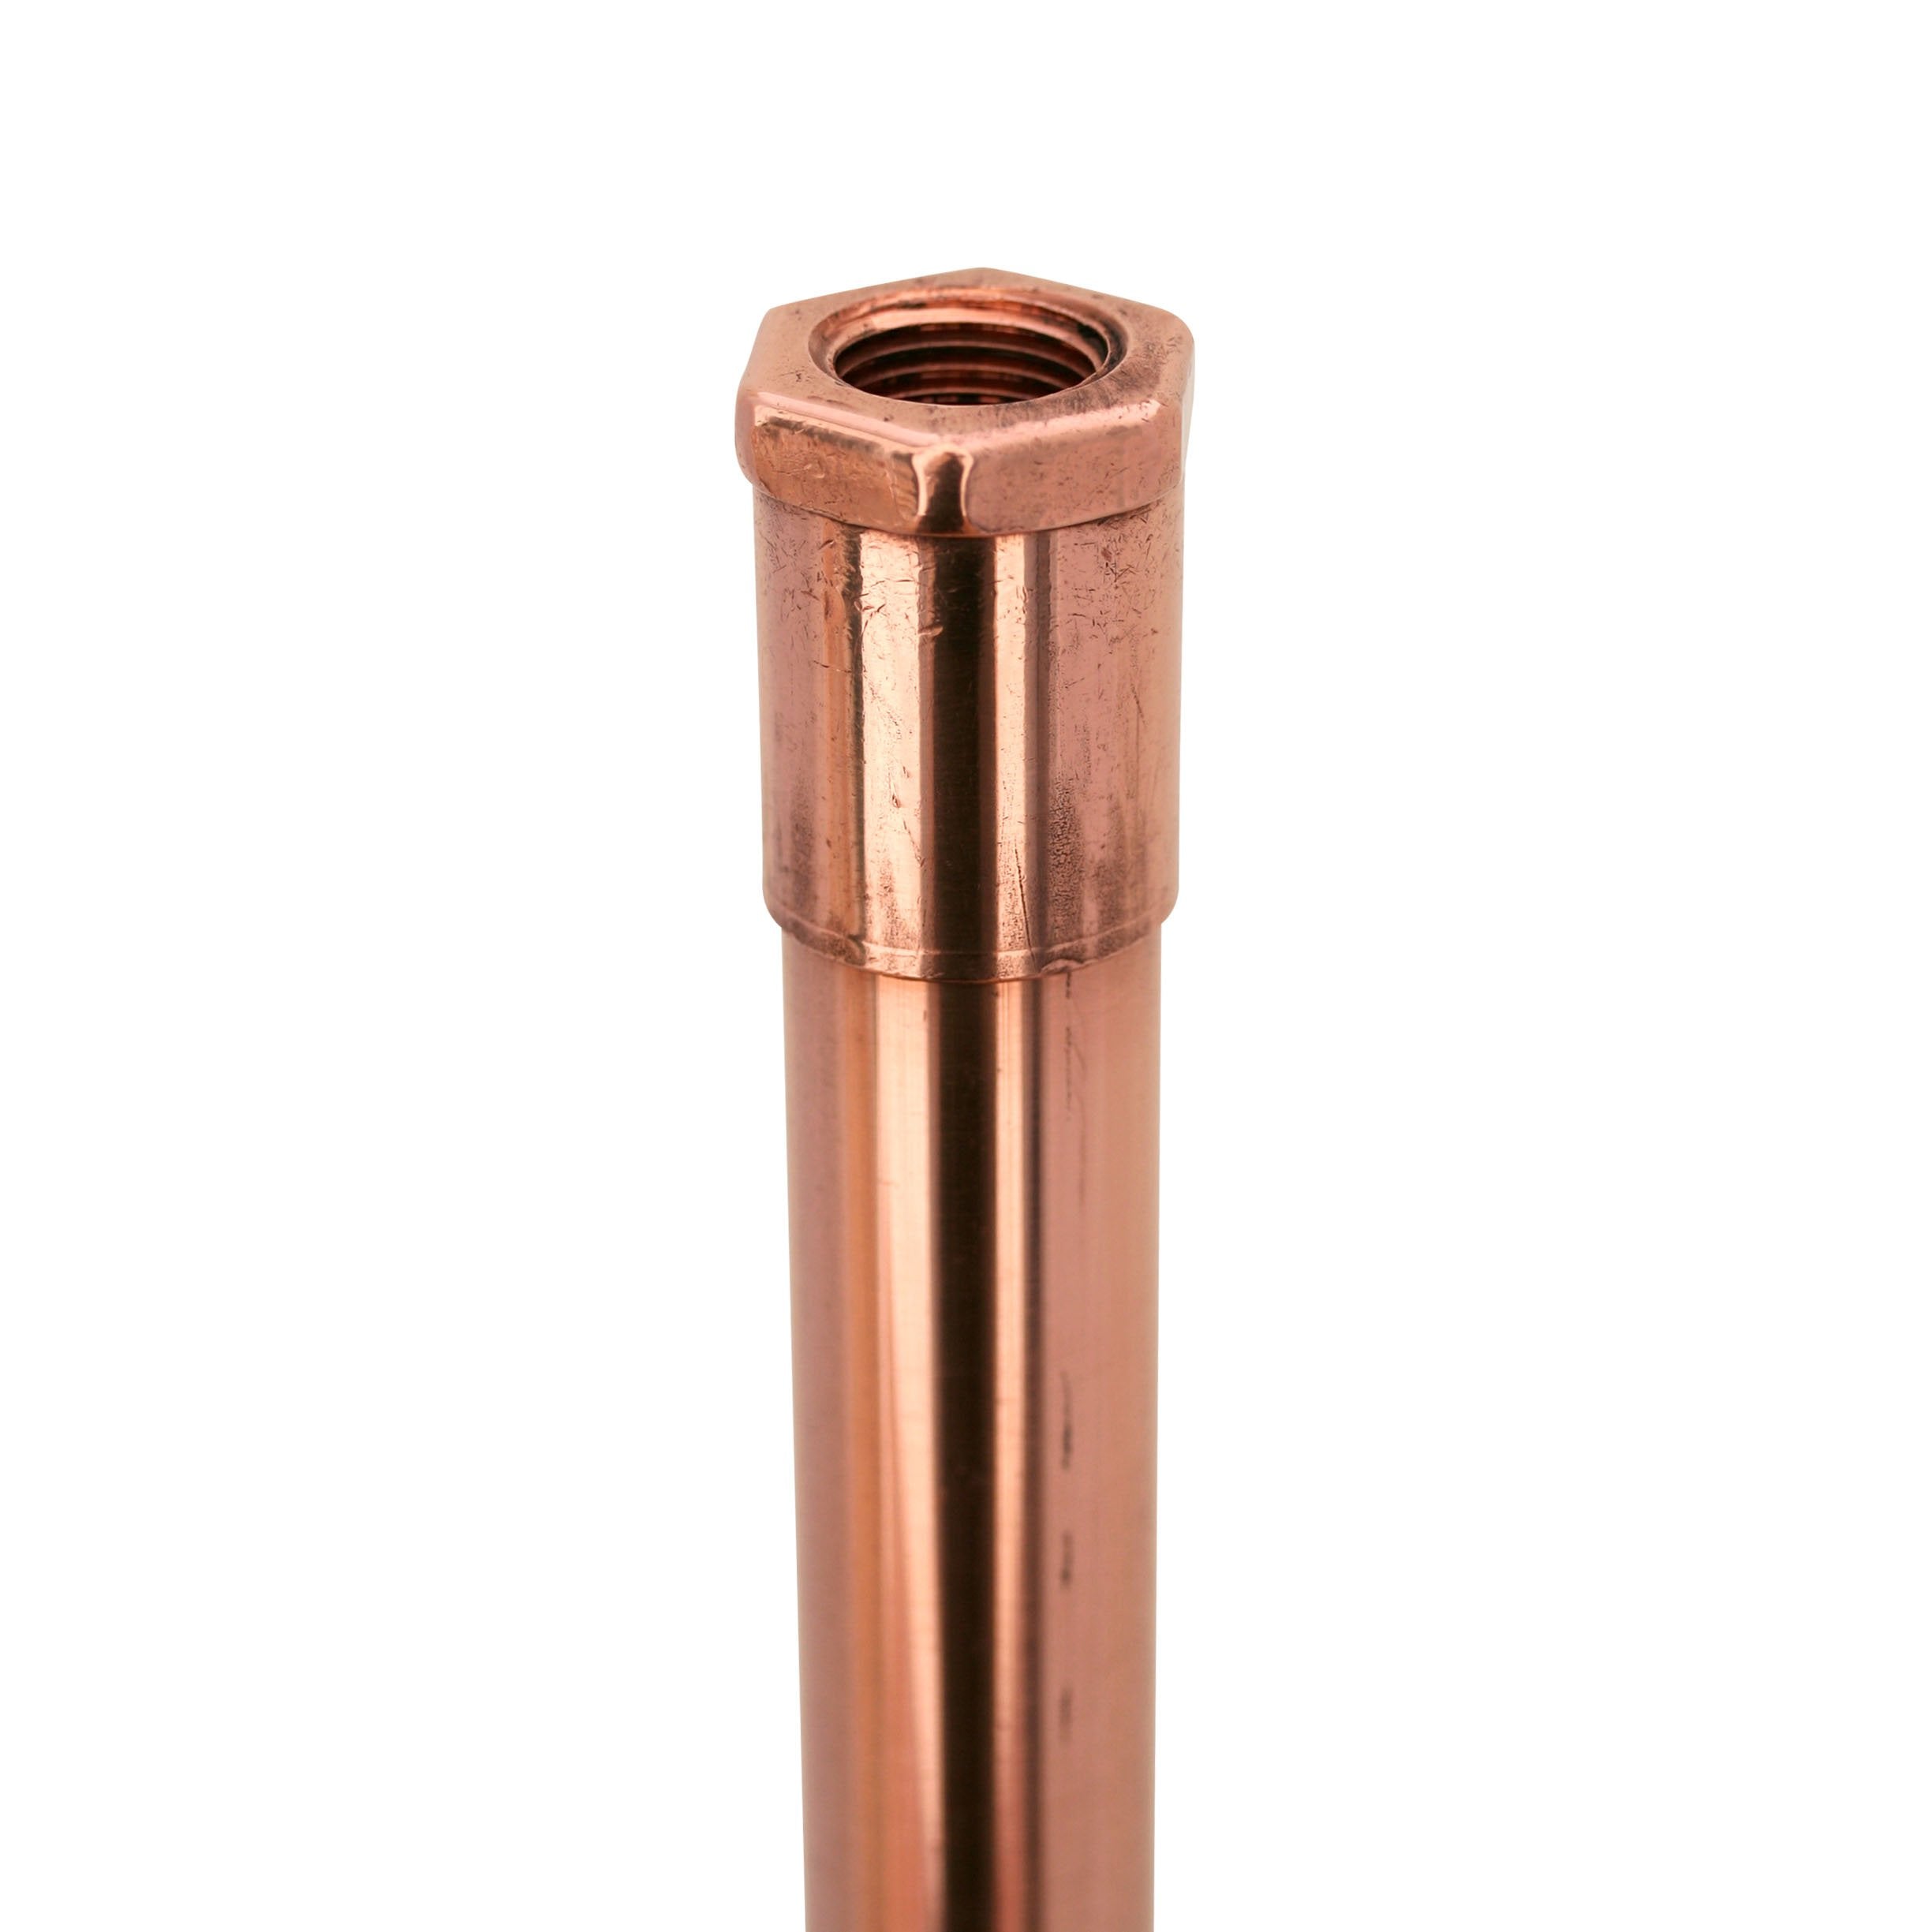 CopperMoon Custom Copper Stem ONLY for CM.20 path light